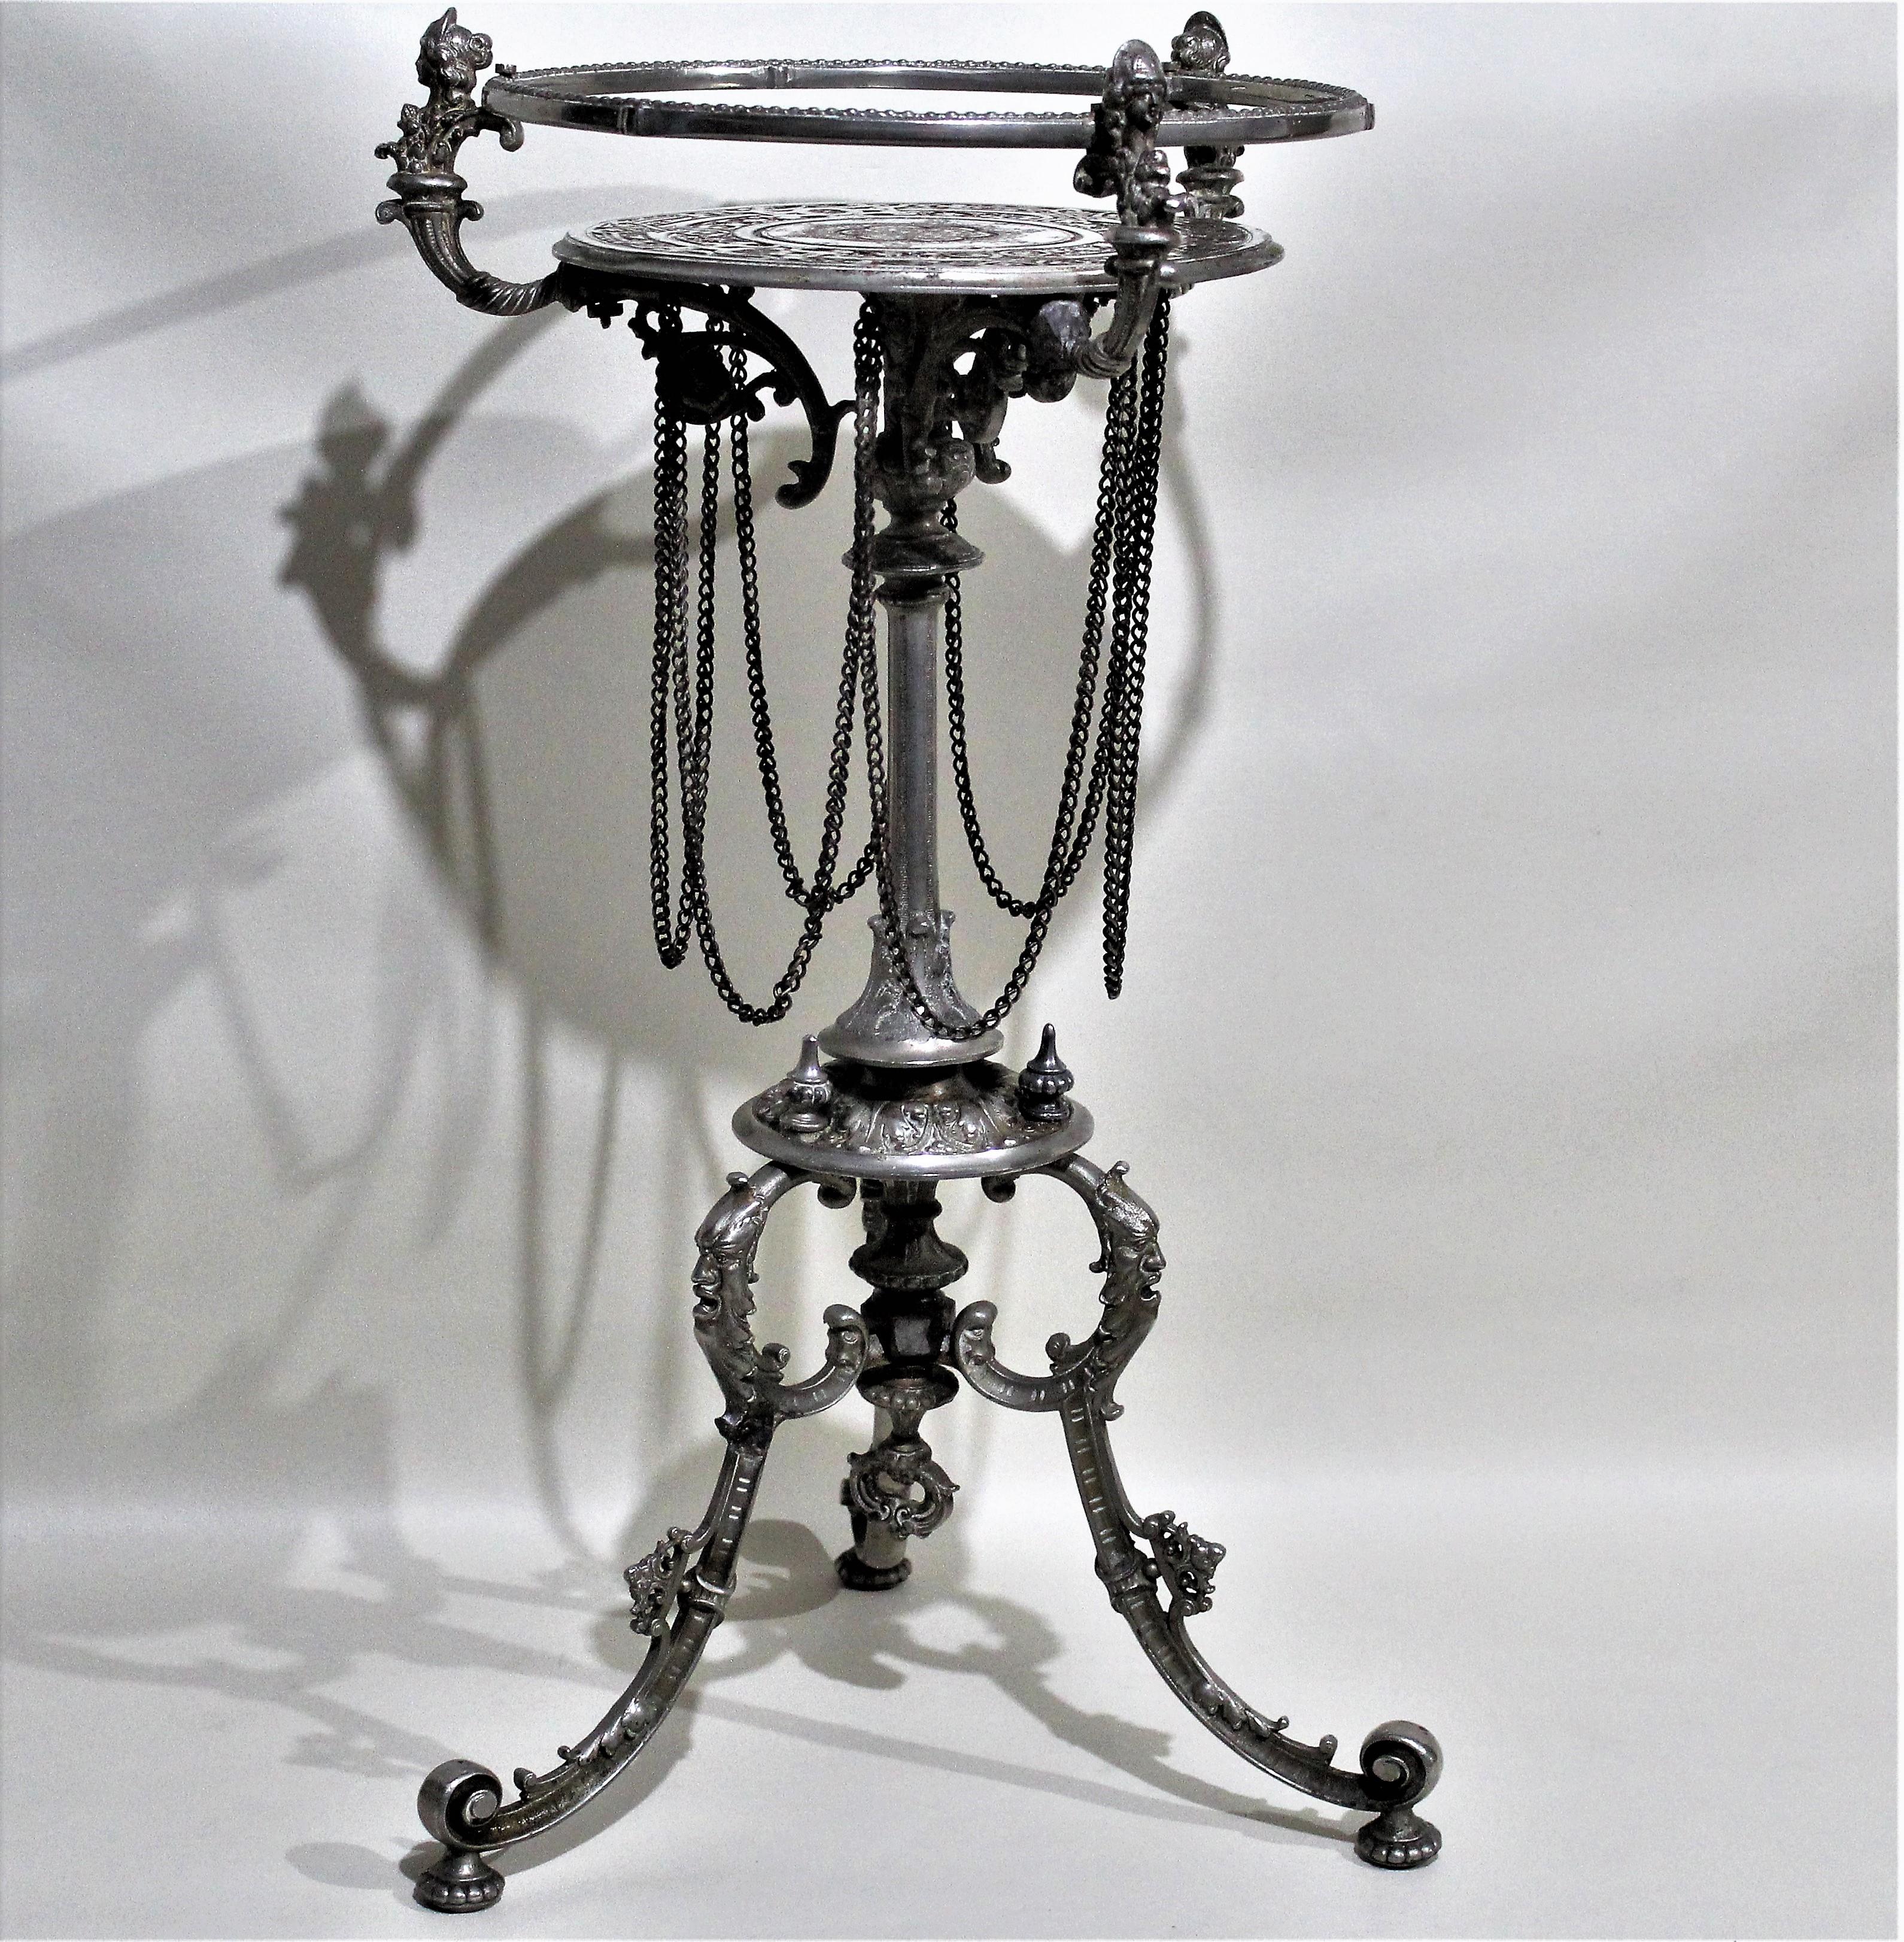 English Antique Victorian Cast Metal Plated Pedestal Table Figural Accents Engraved Top